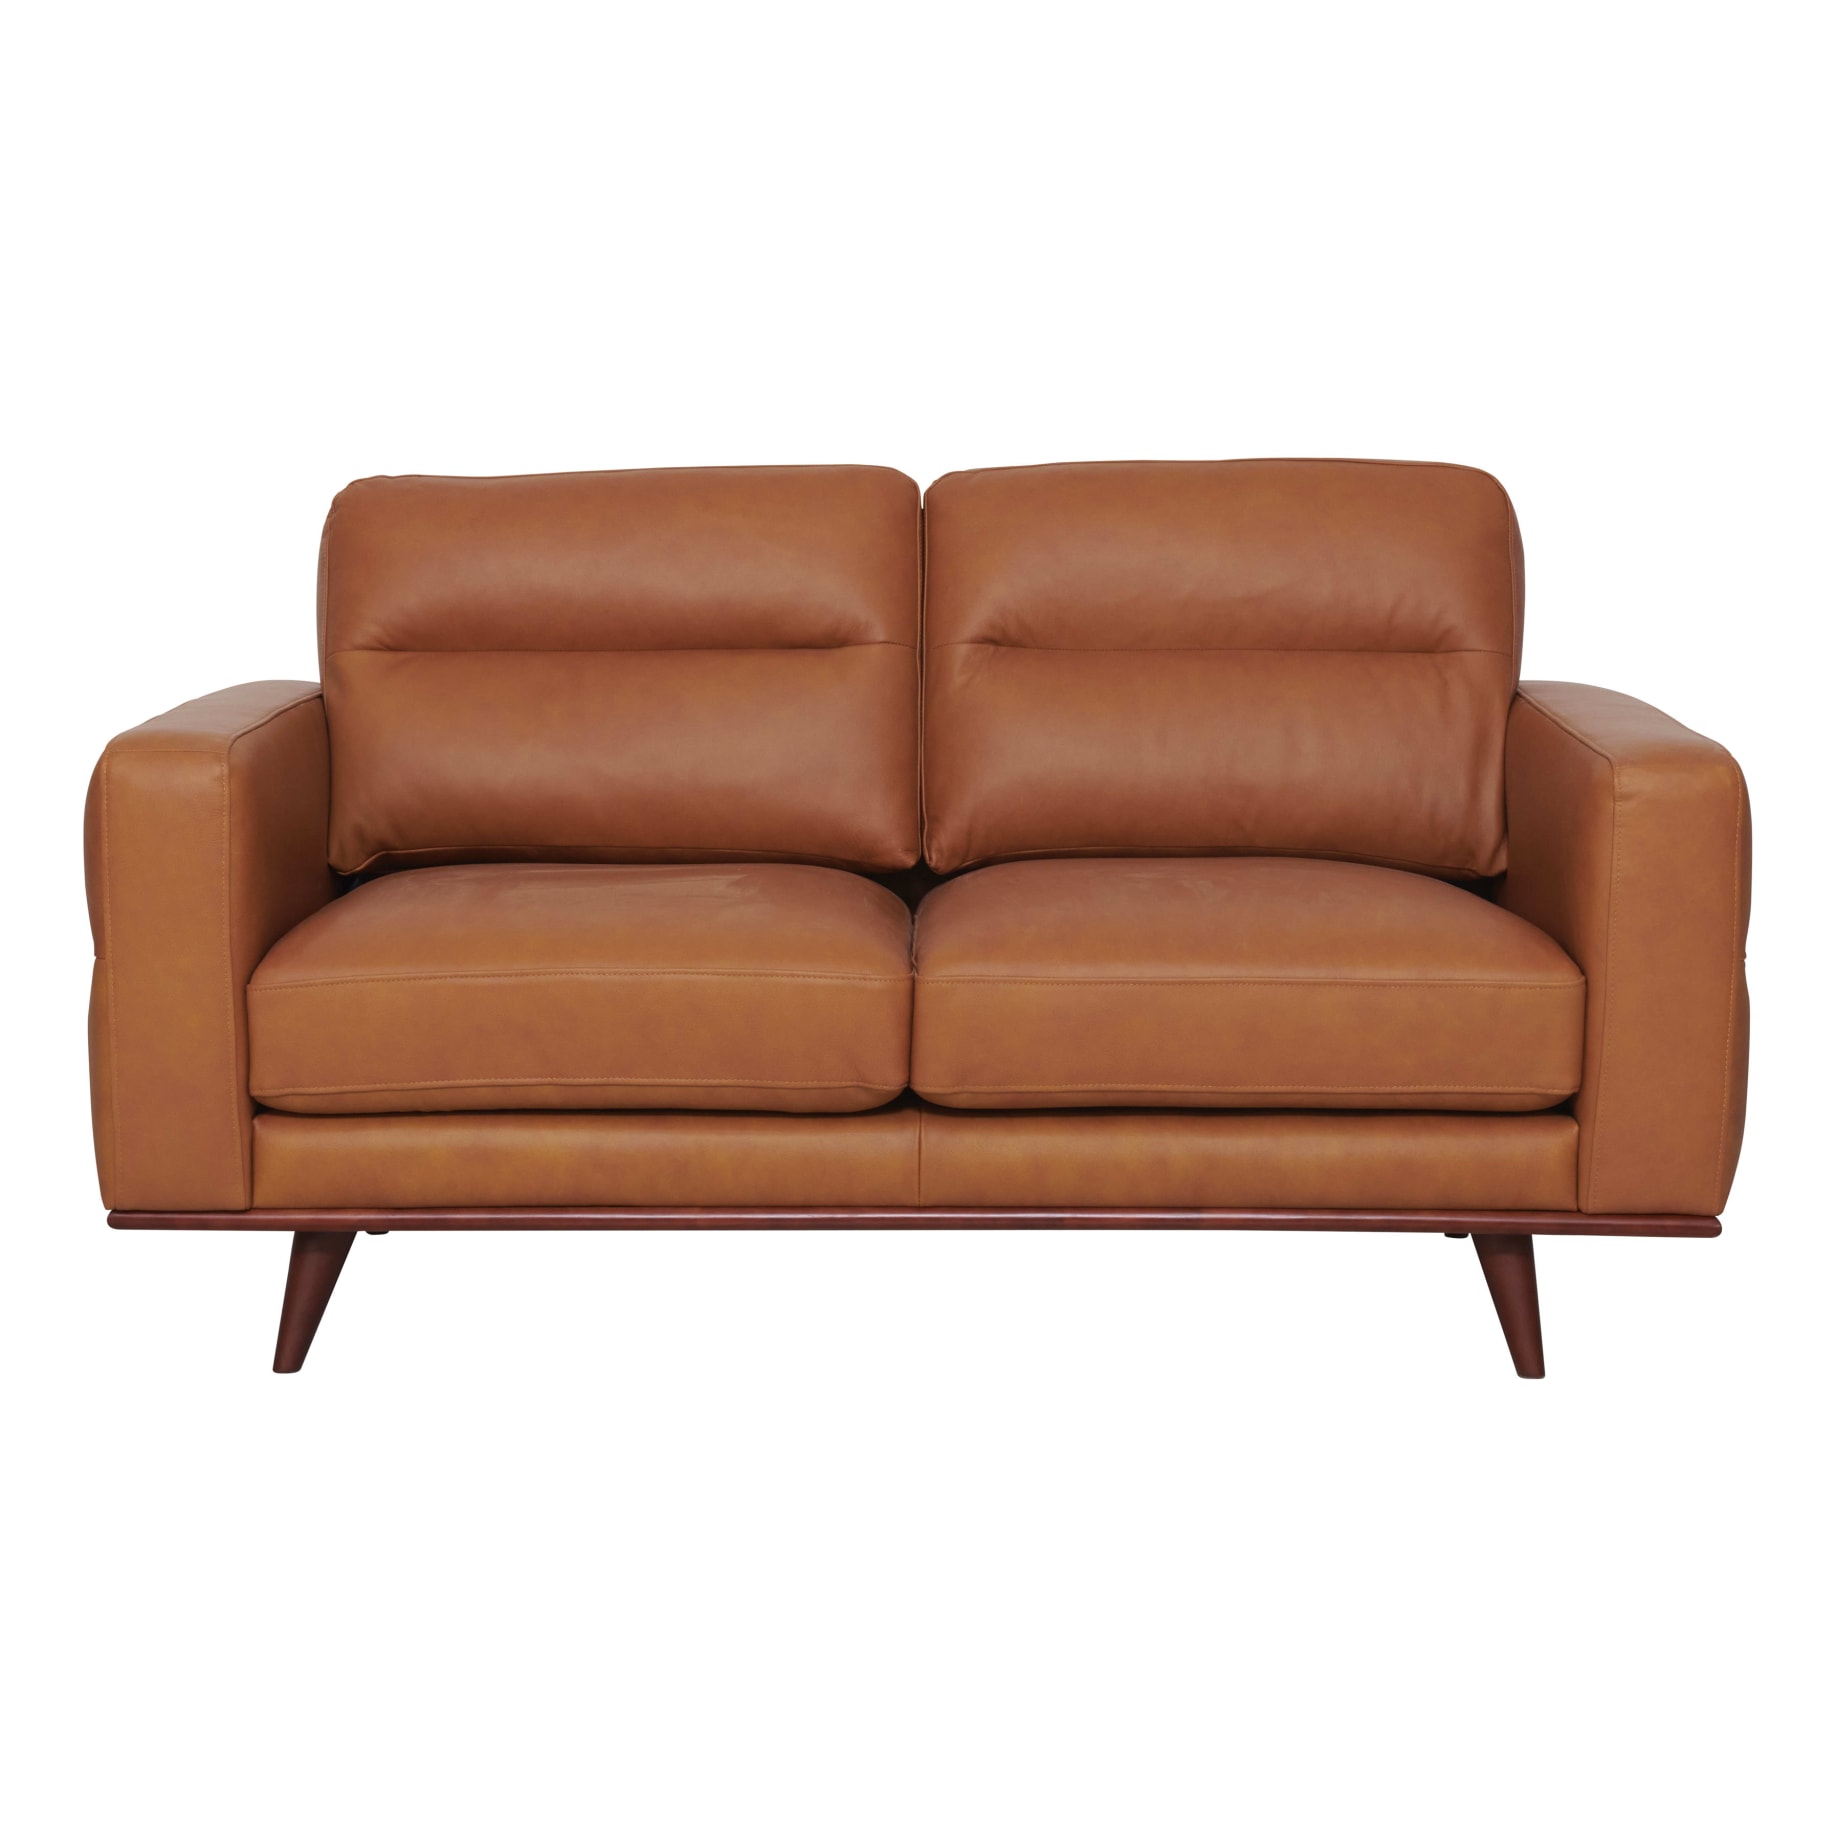 Astrid 2 Seater Sofa in Butler Leather Russet